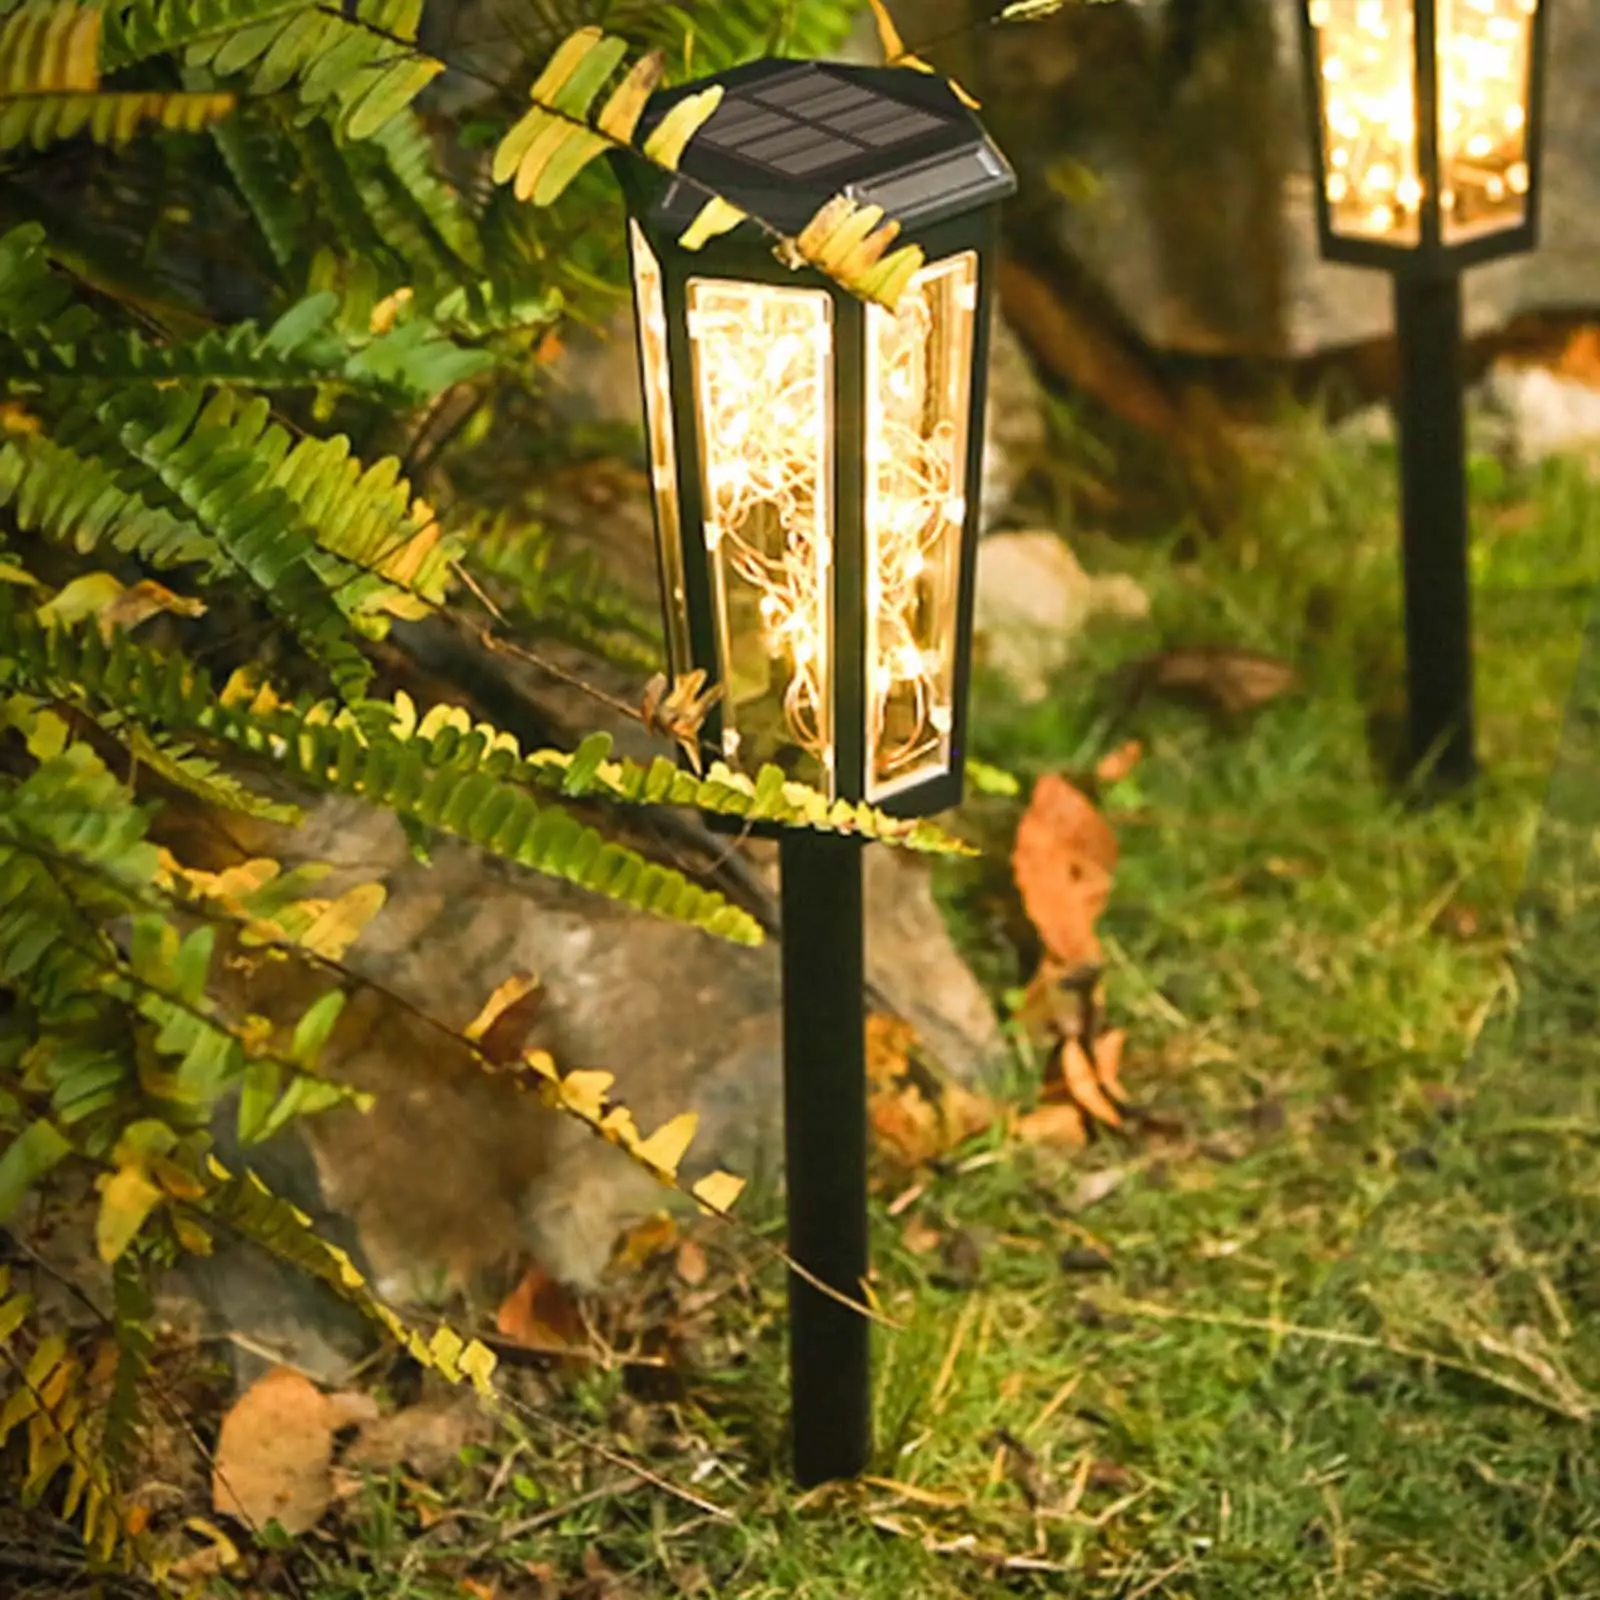 Solar Garden Stakes Lights LED Landscape Lighting Auto On/Off Walkway Outdoor Path Lights for Ground Decor Christmas Wedding